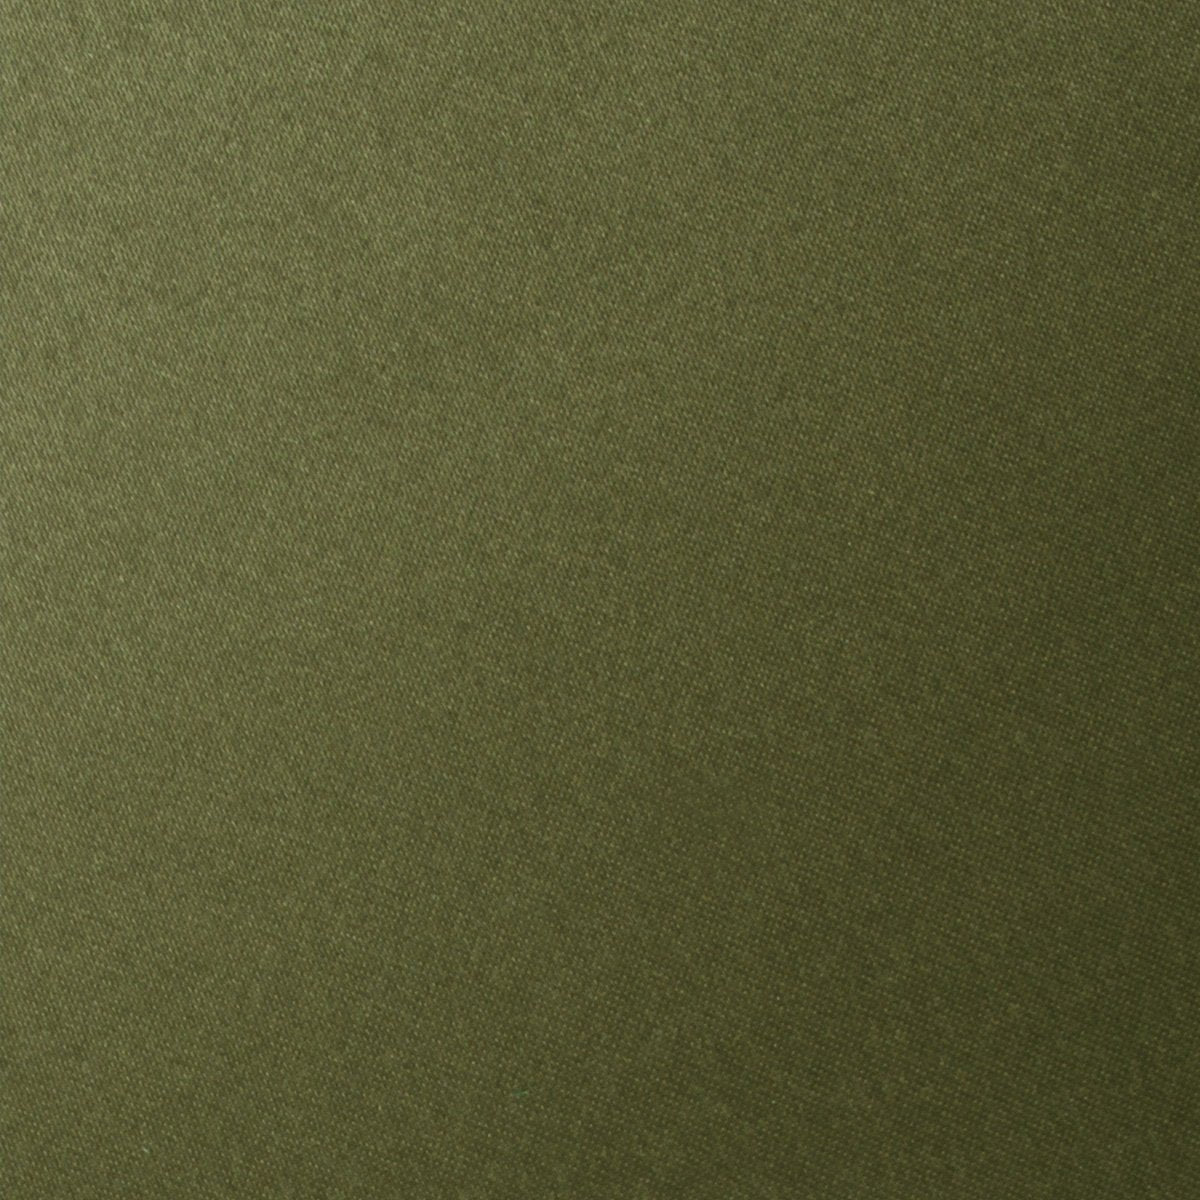 Olive Green Satin Fabric Swatch